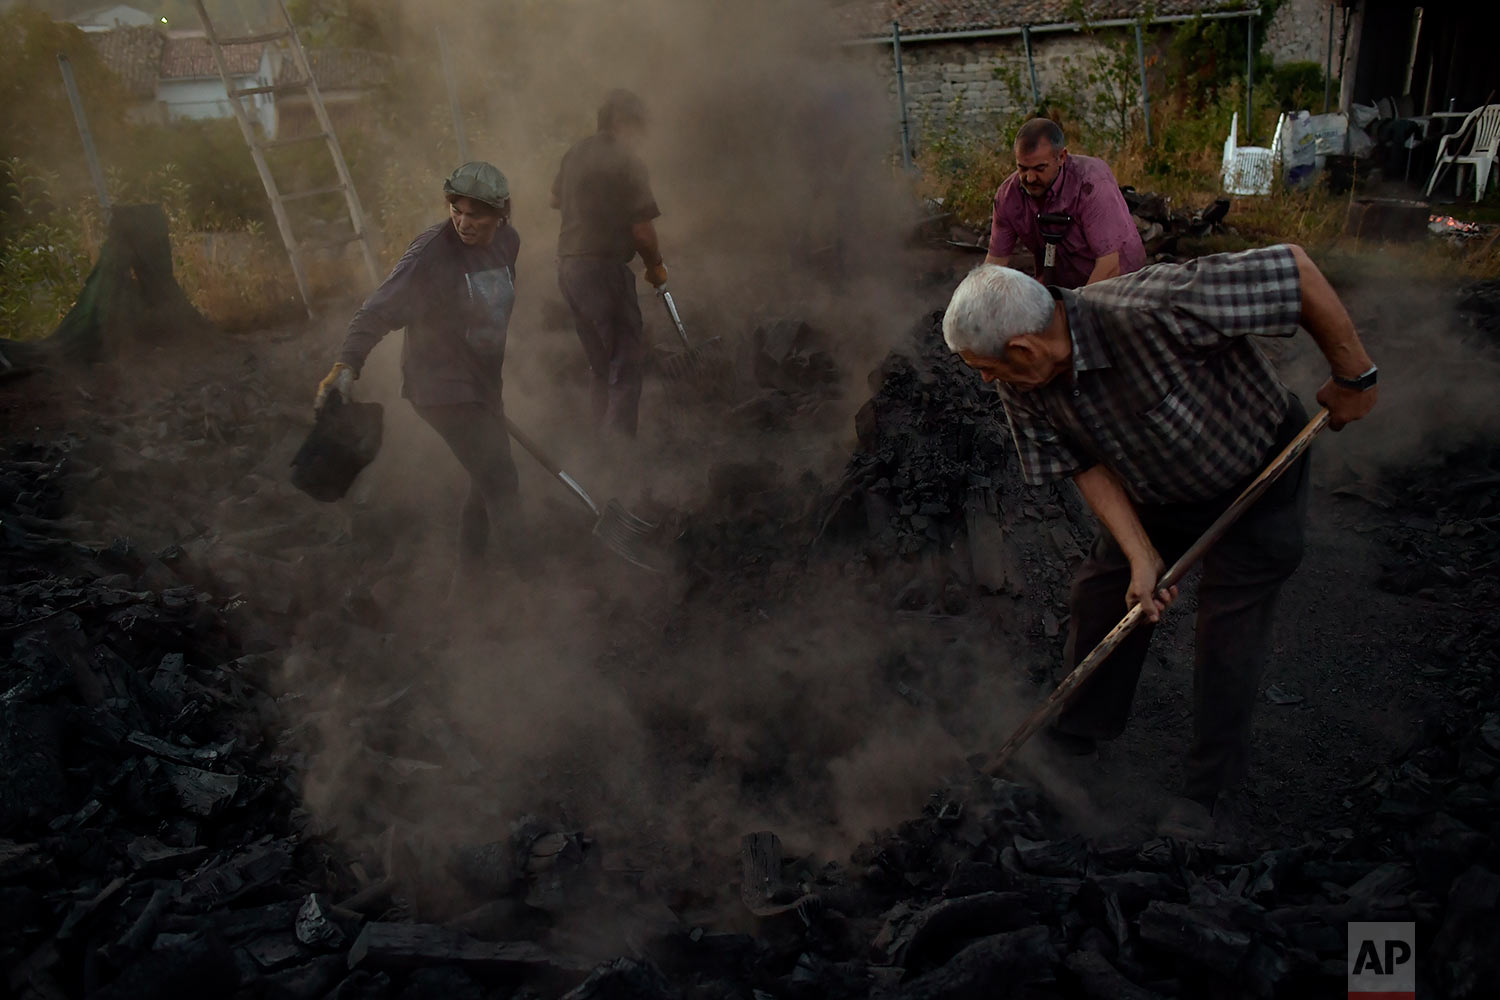  In this Tuesday, Sept.11, 2018 photo, workers extinguish the fire of burning tree trunks, as part of a process to produce traditional charcoal in Viloria, northern Spain. (AP Photo/Alvaro Barrientos) 